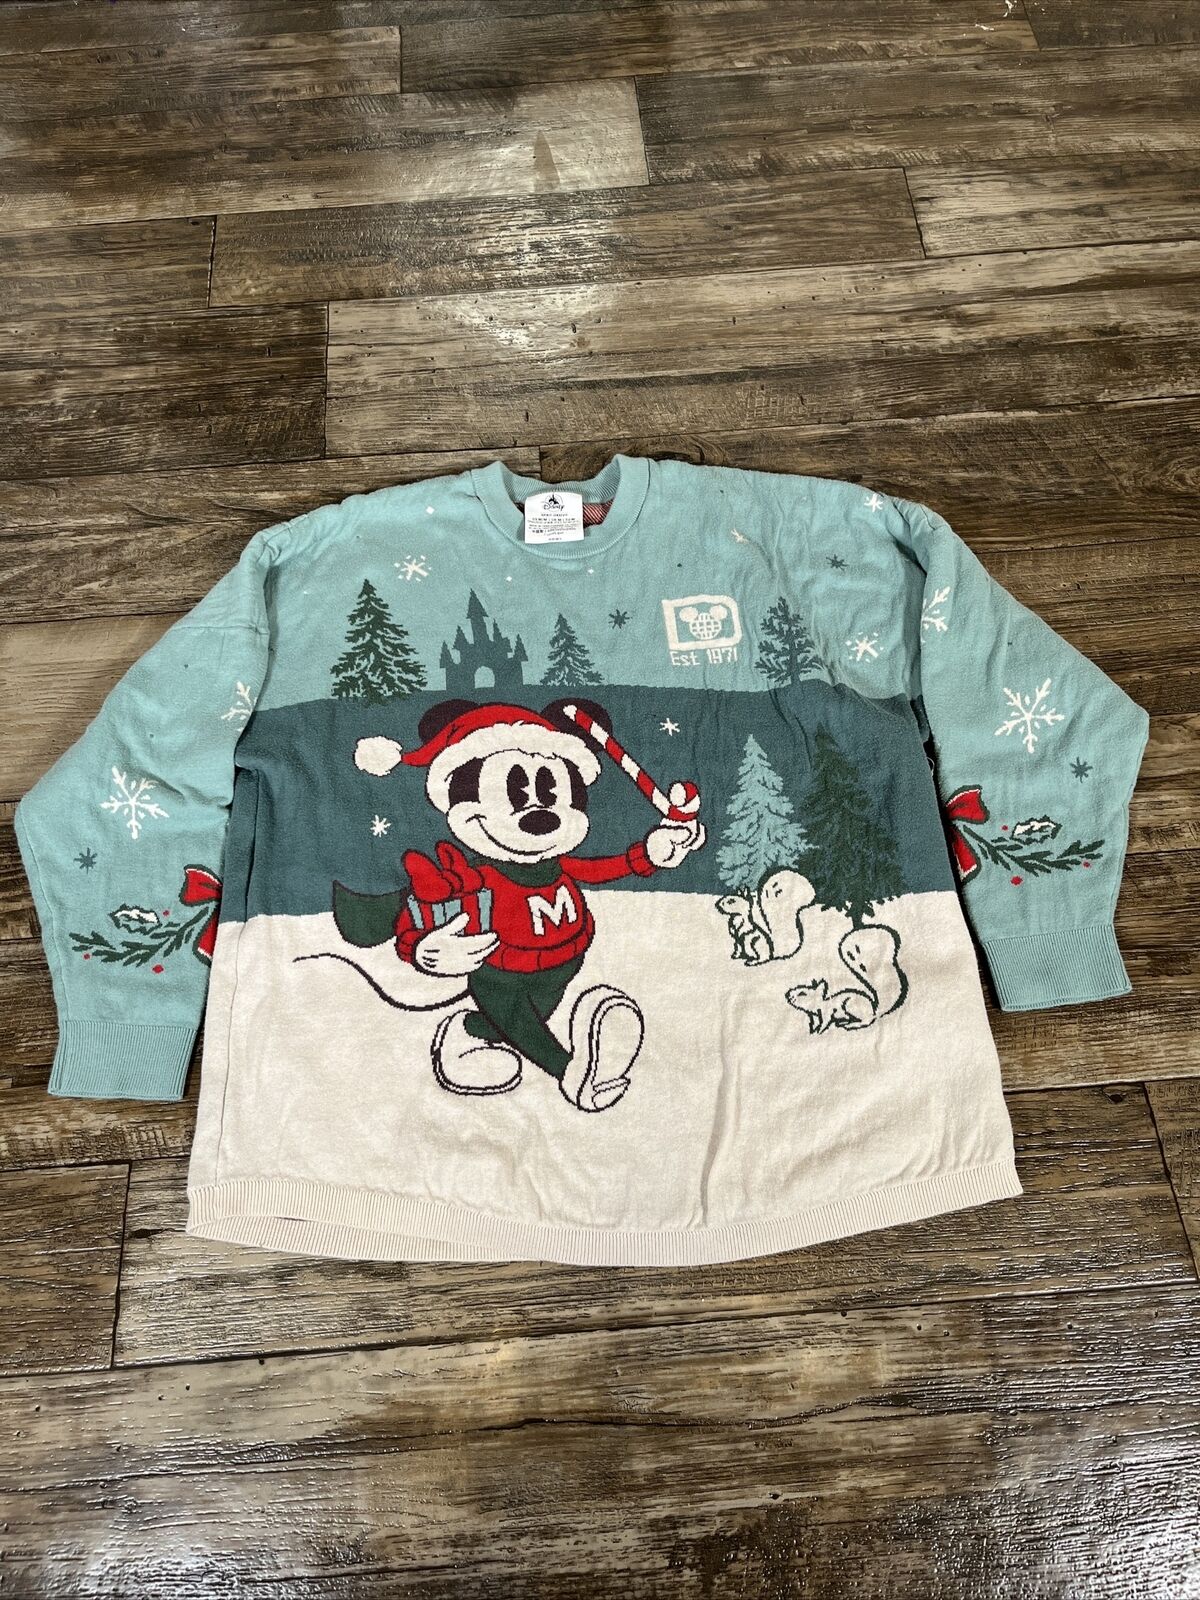 Adult Med Disneyland Mickey Mouse Holiday Spirit Jersey Sweater Christmas P2